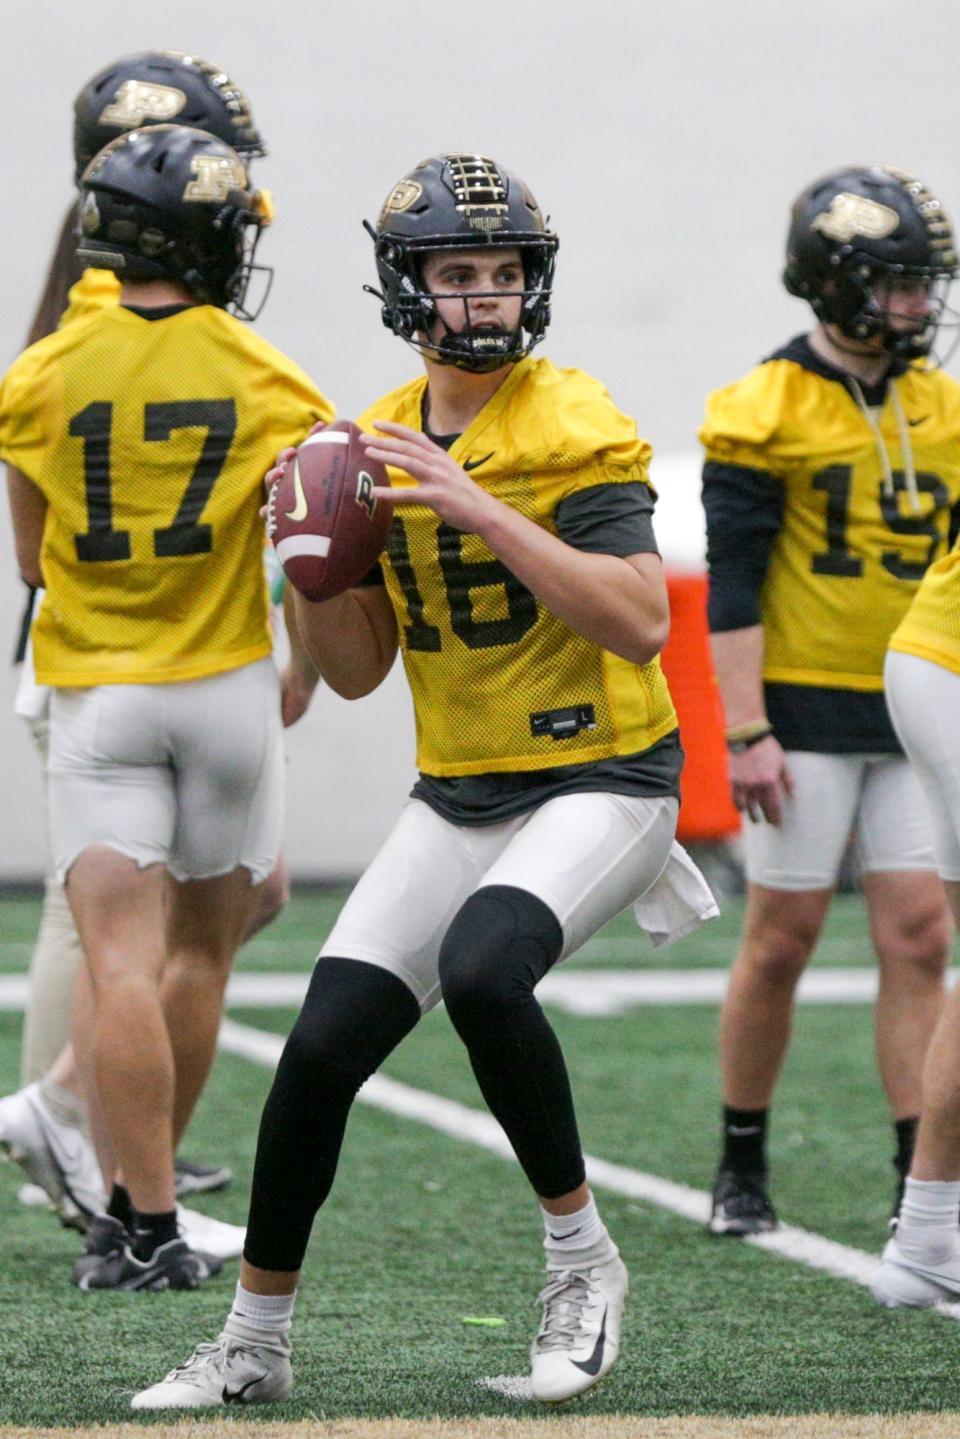 Purdue quarterback Aidan O'Connell (16) during a practice, Monday, Feb. 28, 2022 at Mollenkopf Athletic Center in West Lafayette.